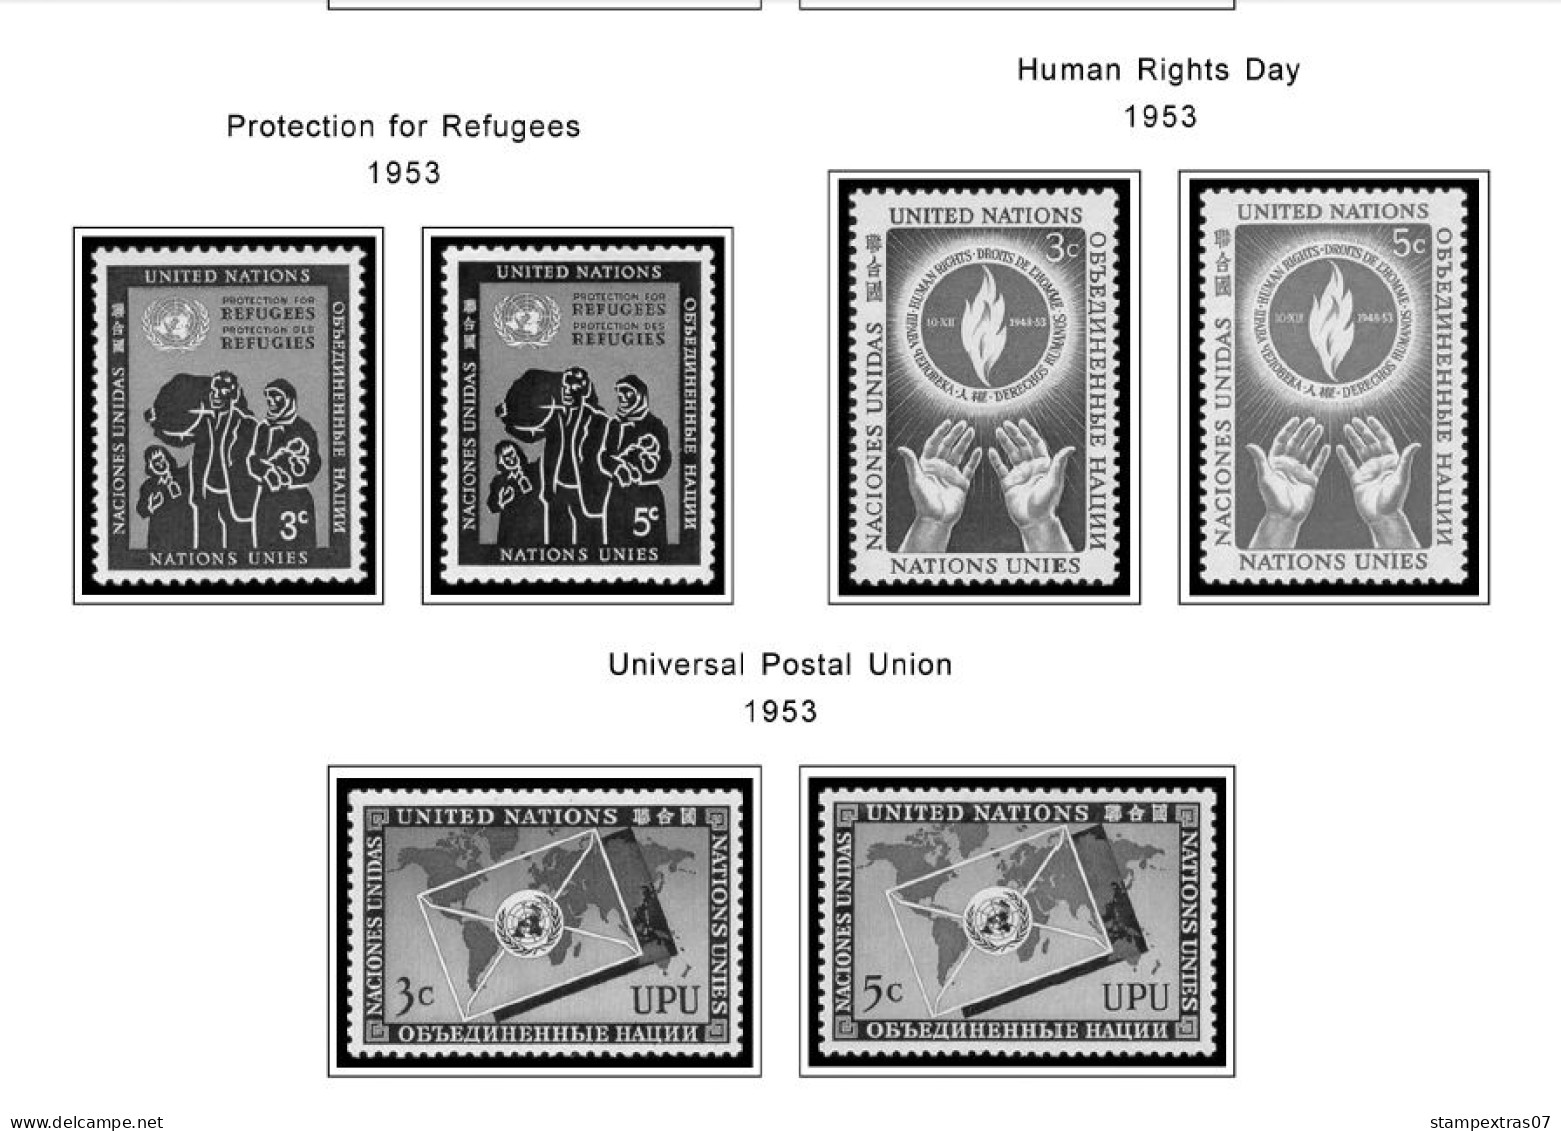 UNITED NATIONS - NEW YORK 1951-2020 STAMP ALBUM PAGES (229 B&w Illustrated Pages) - Engels